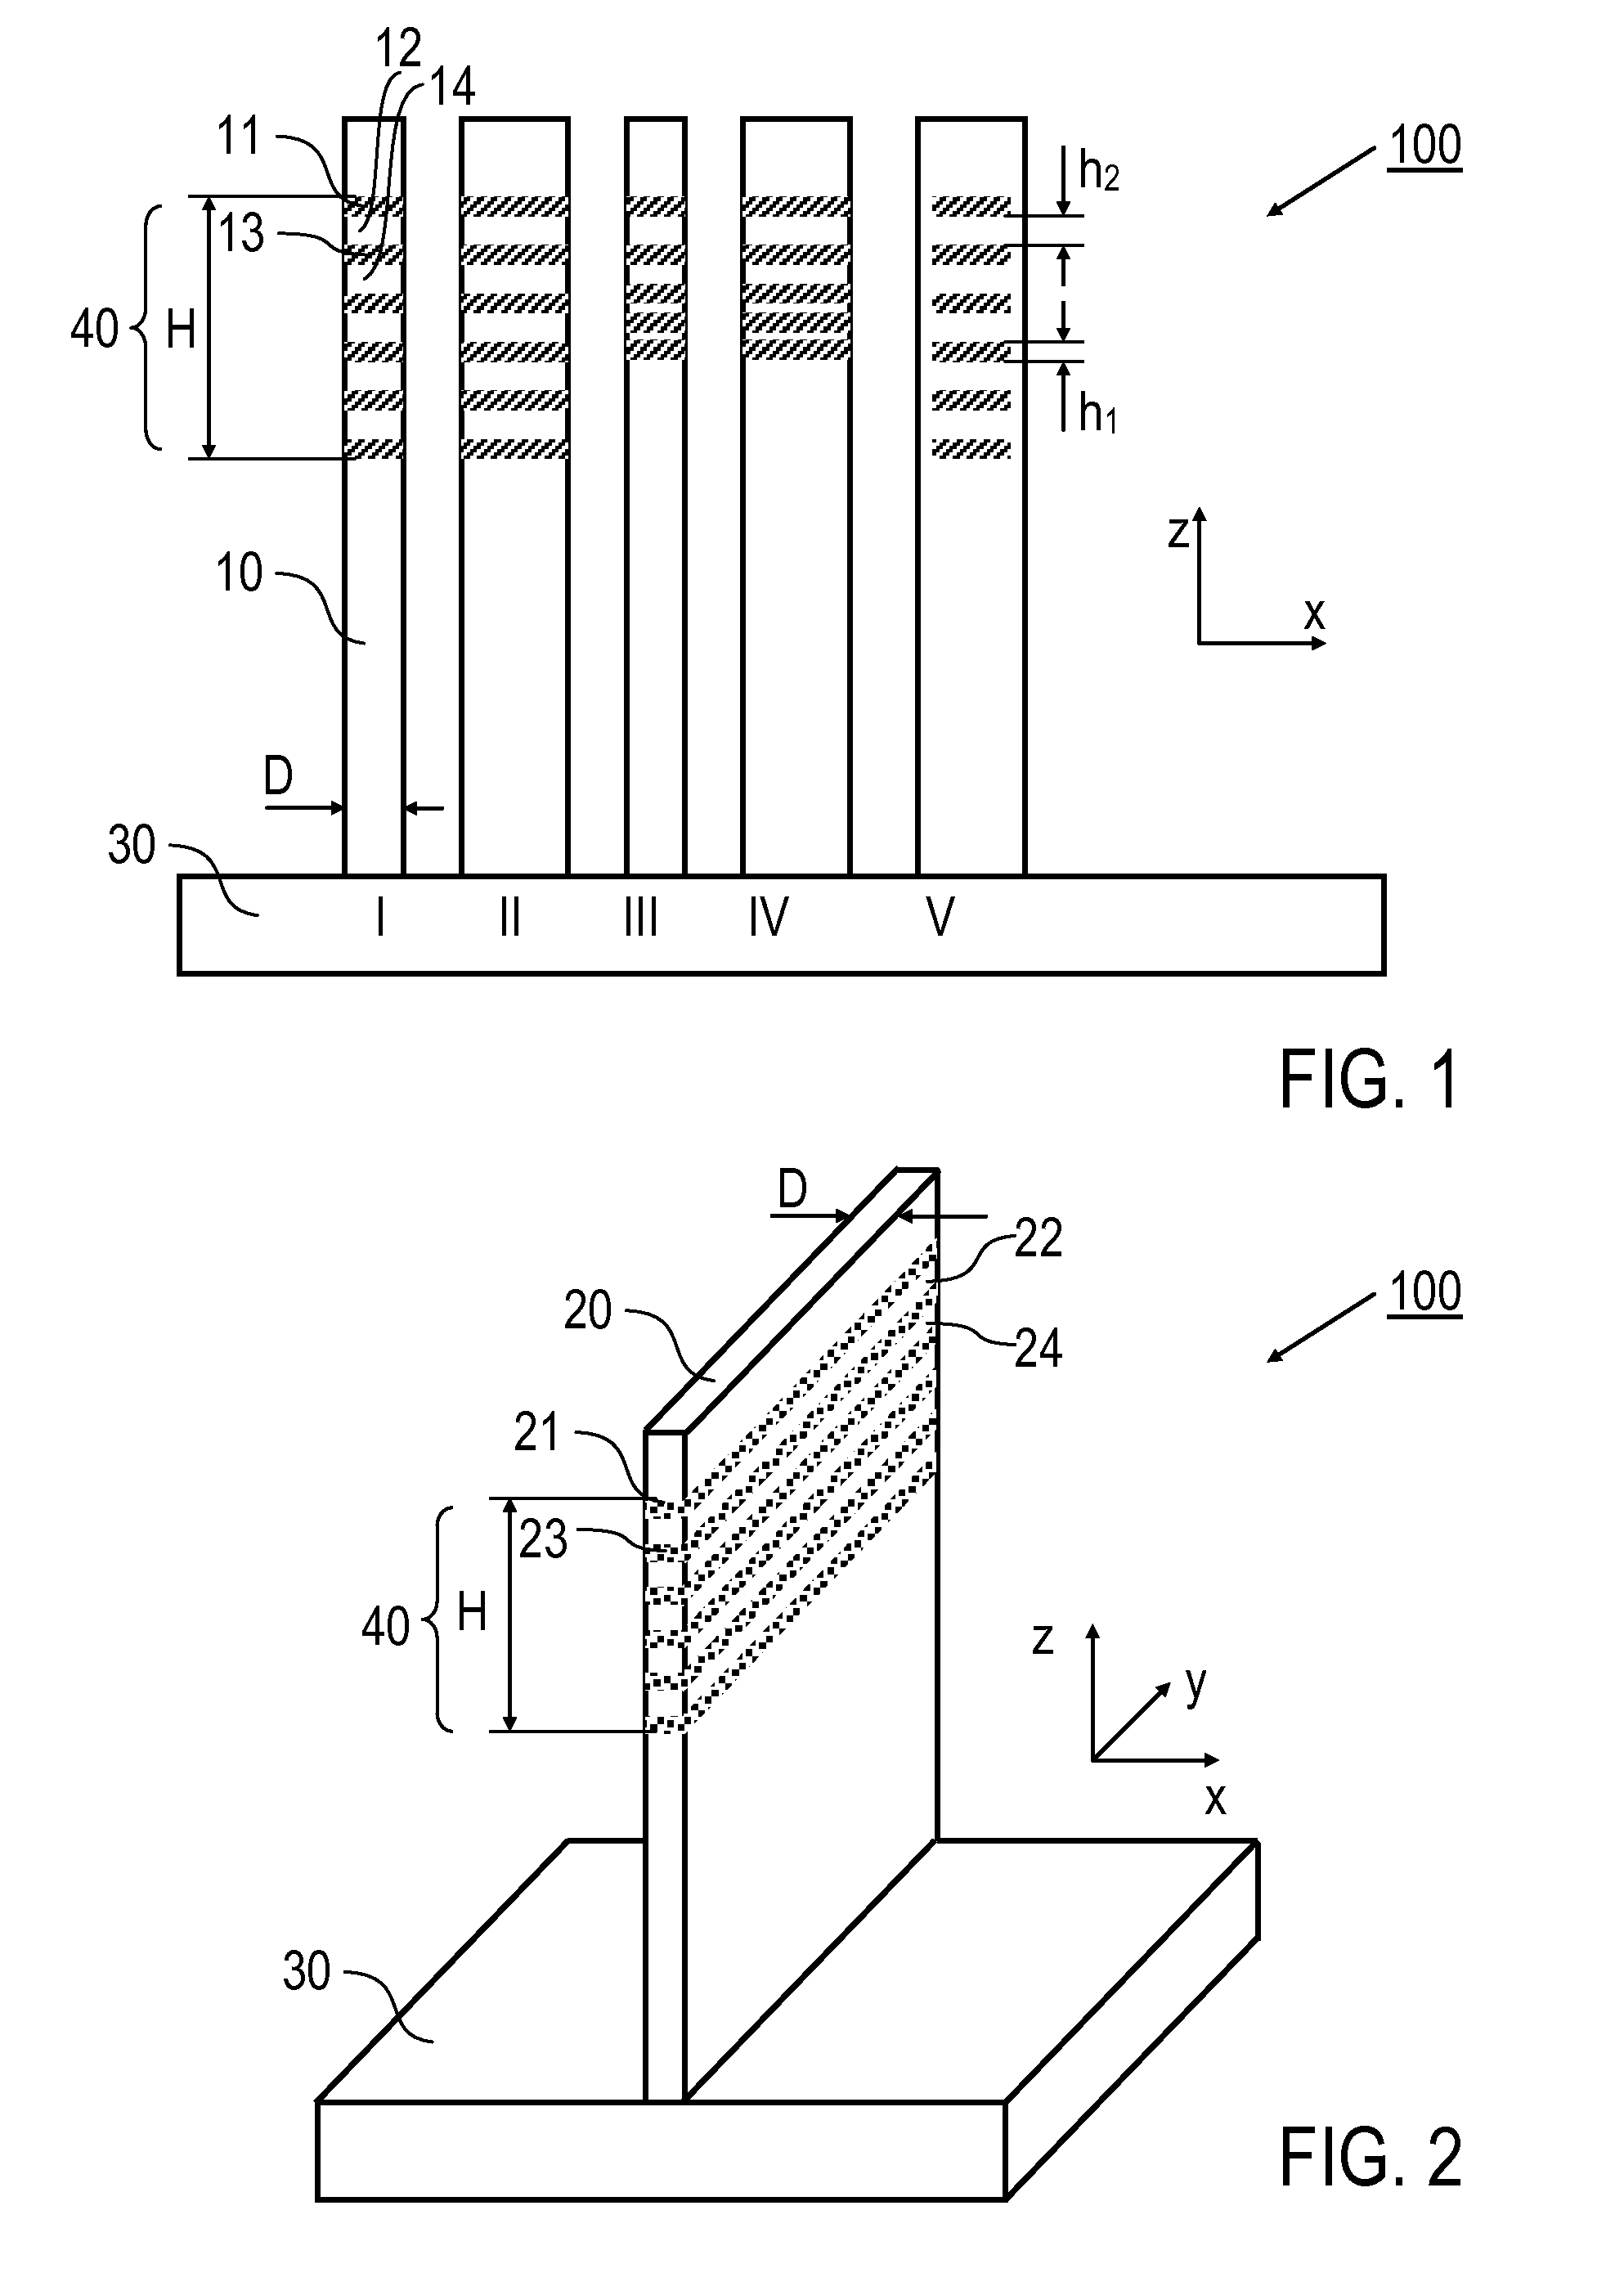 Production of a semiconductor device having at least one column-shaped or wall-shaped semiconductor element